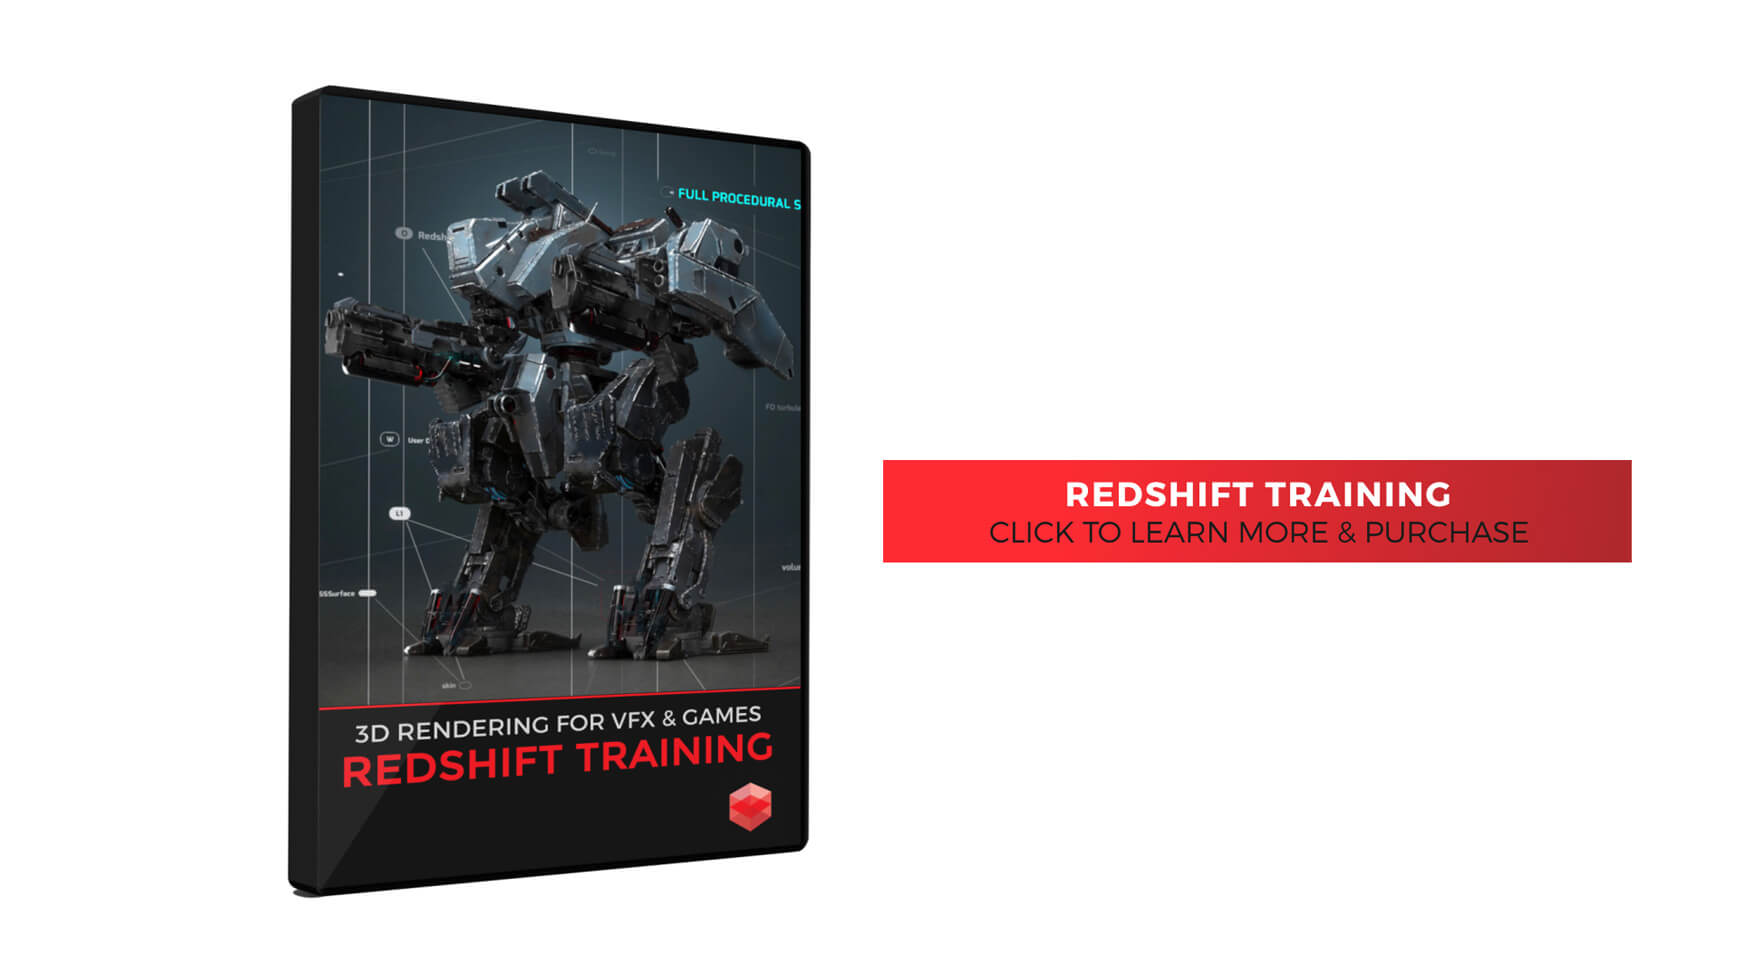 3D Rendering for VFX and Games Redshift